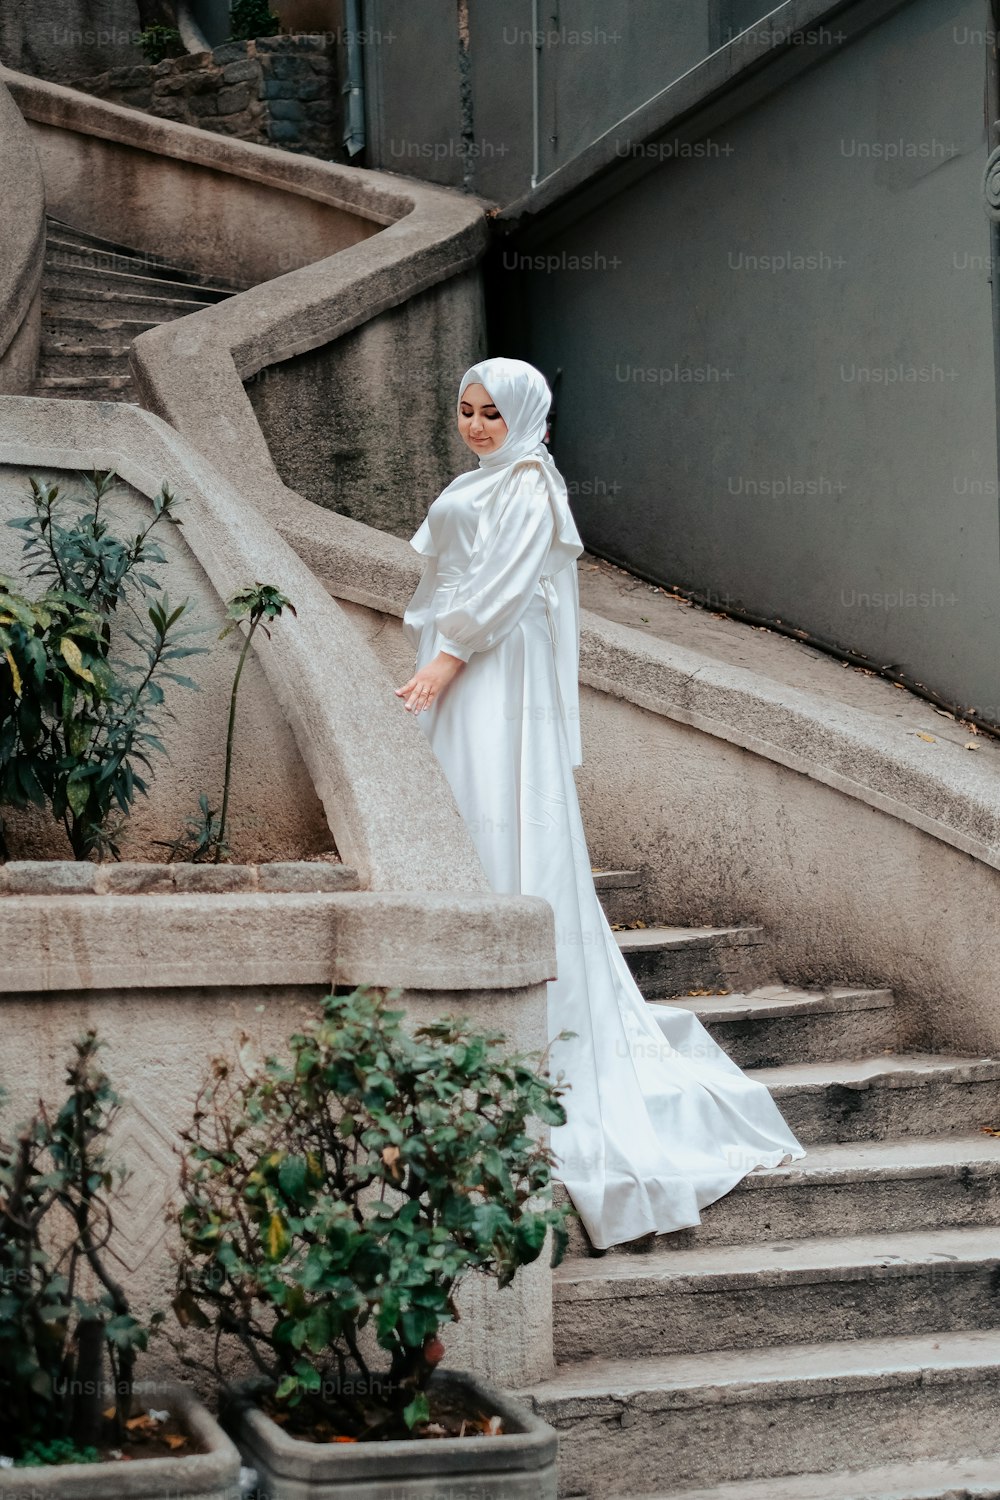 a woman in a white dress standing on some steps